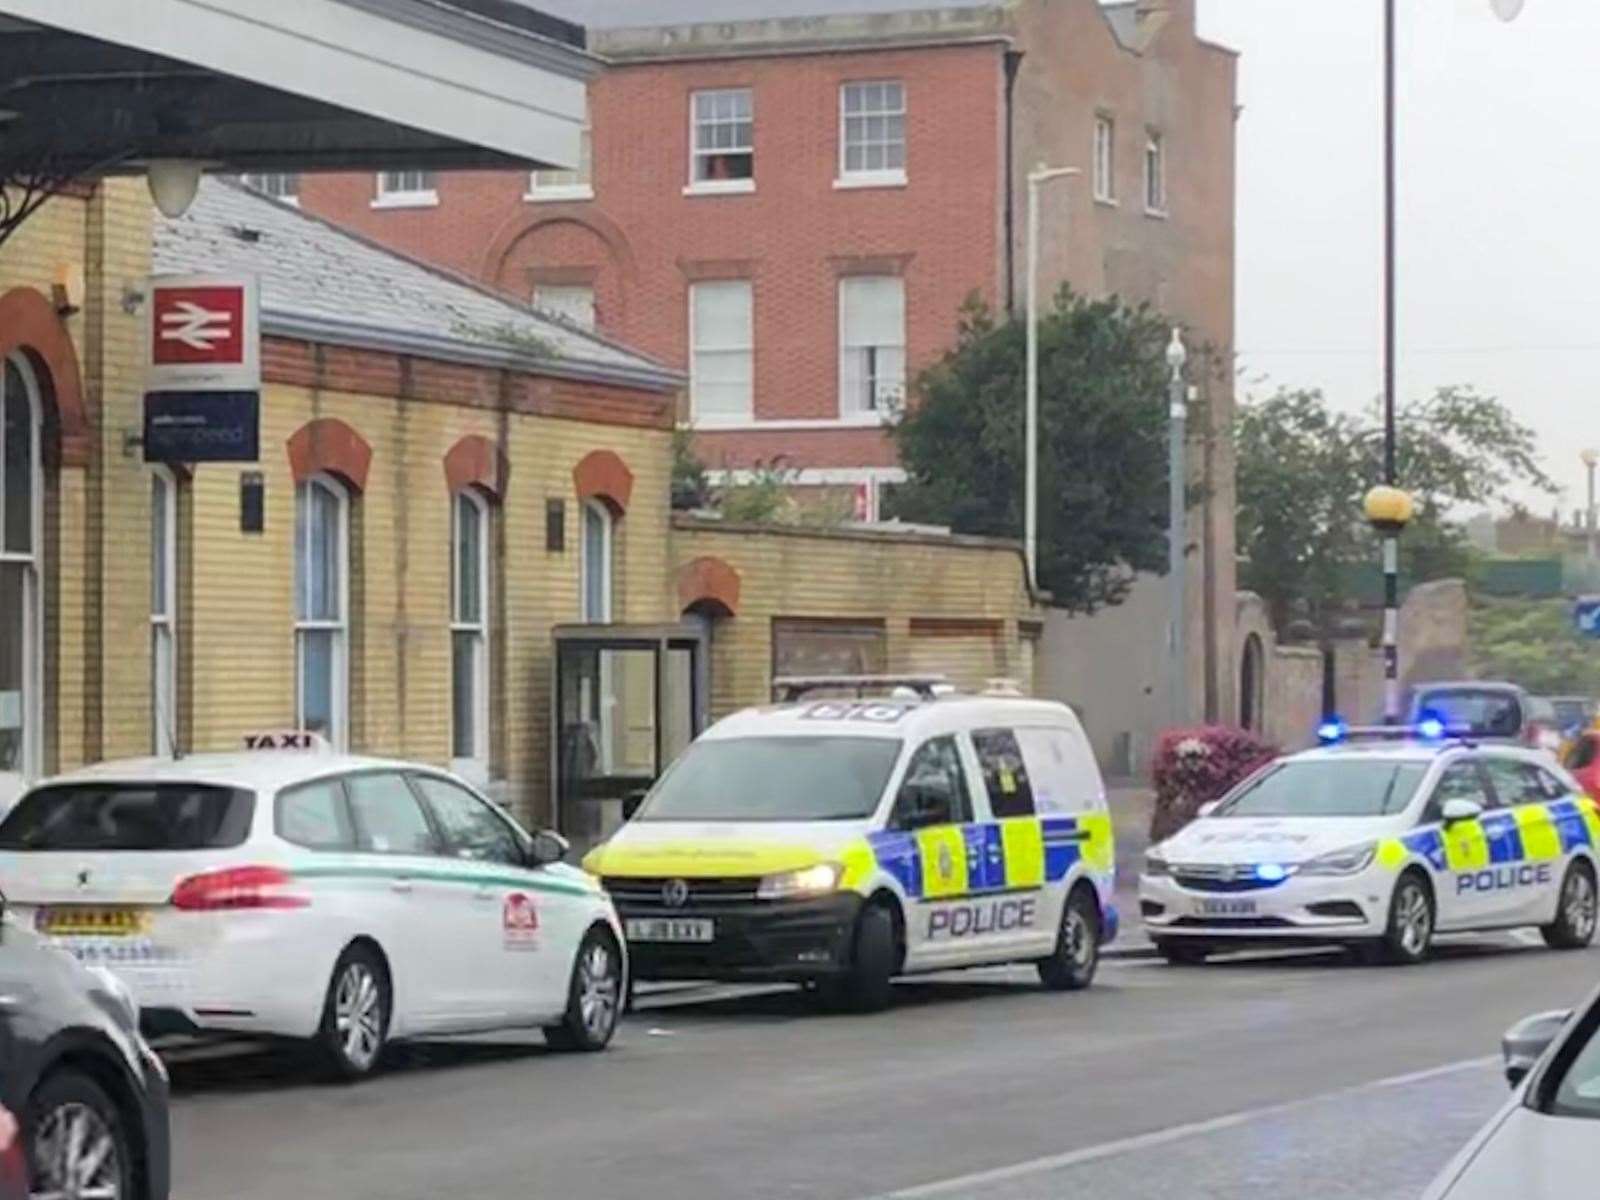 Police vehicles at Faversham station this afternoon